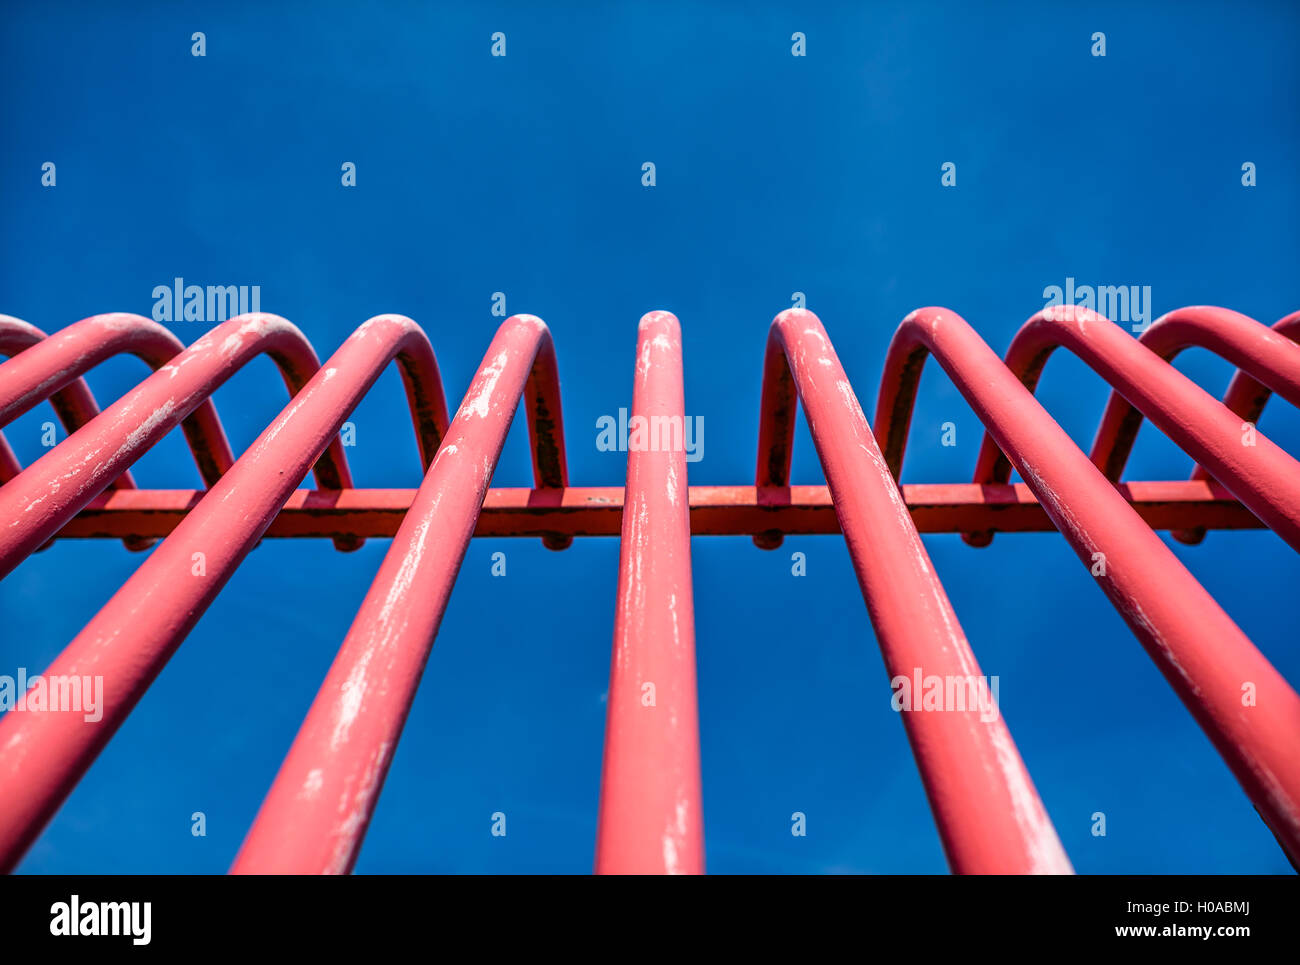 Red metal barred modern security barrier against a blue sky. Stock Photo